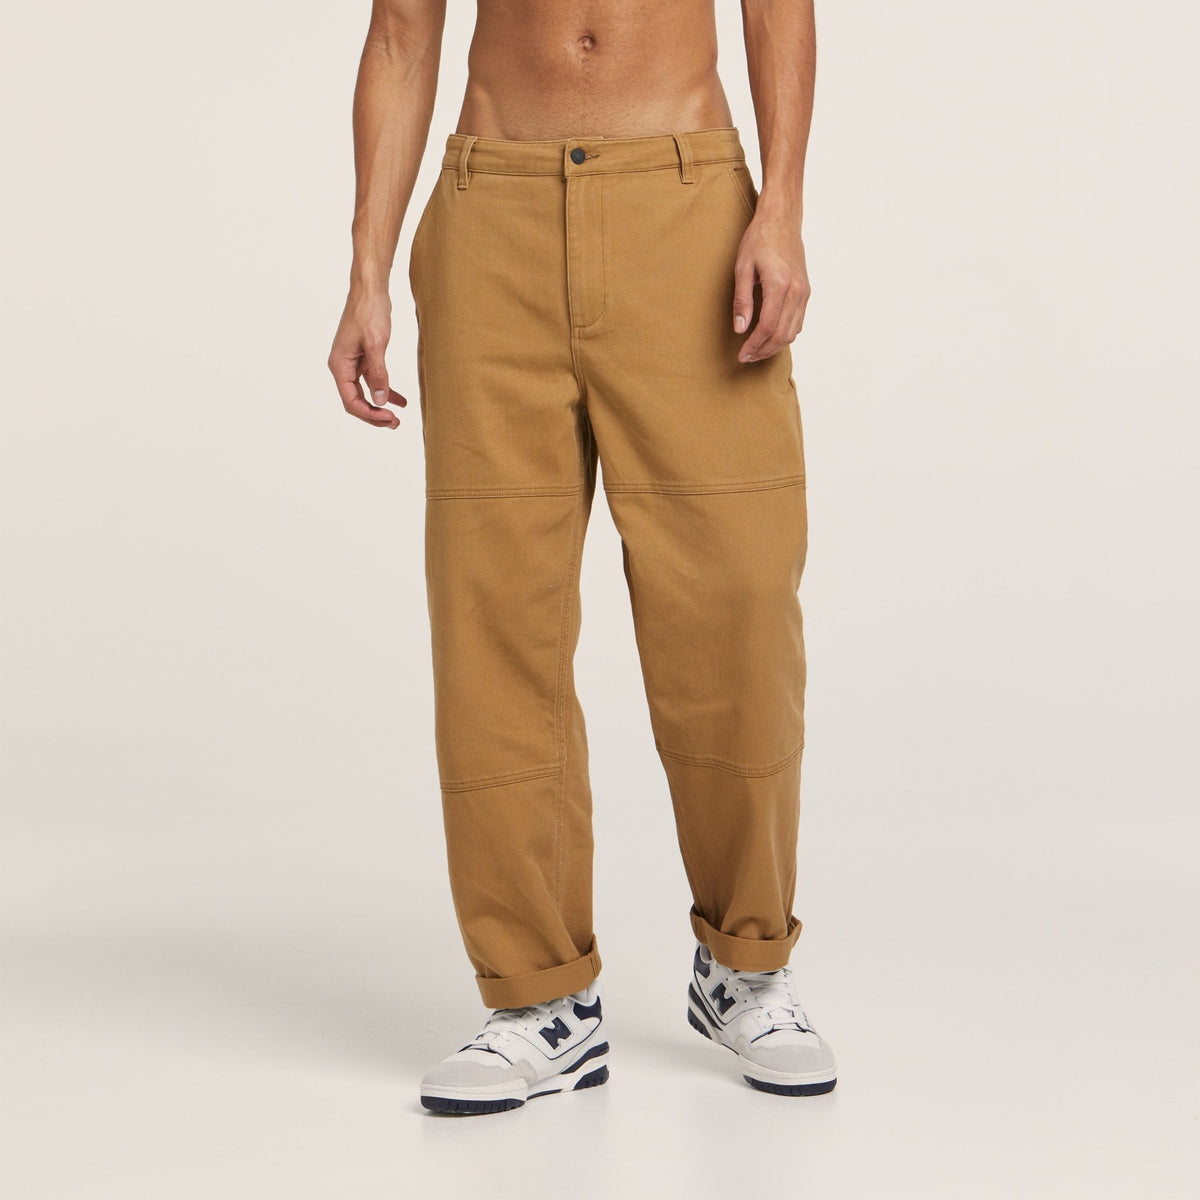 LEE WORKER PANT PANELLED C - SUNDAY BEST TRADING CO